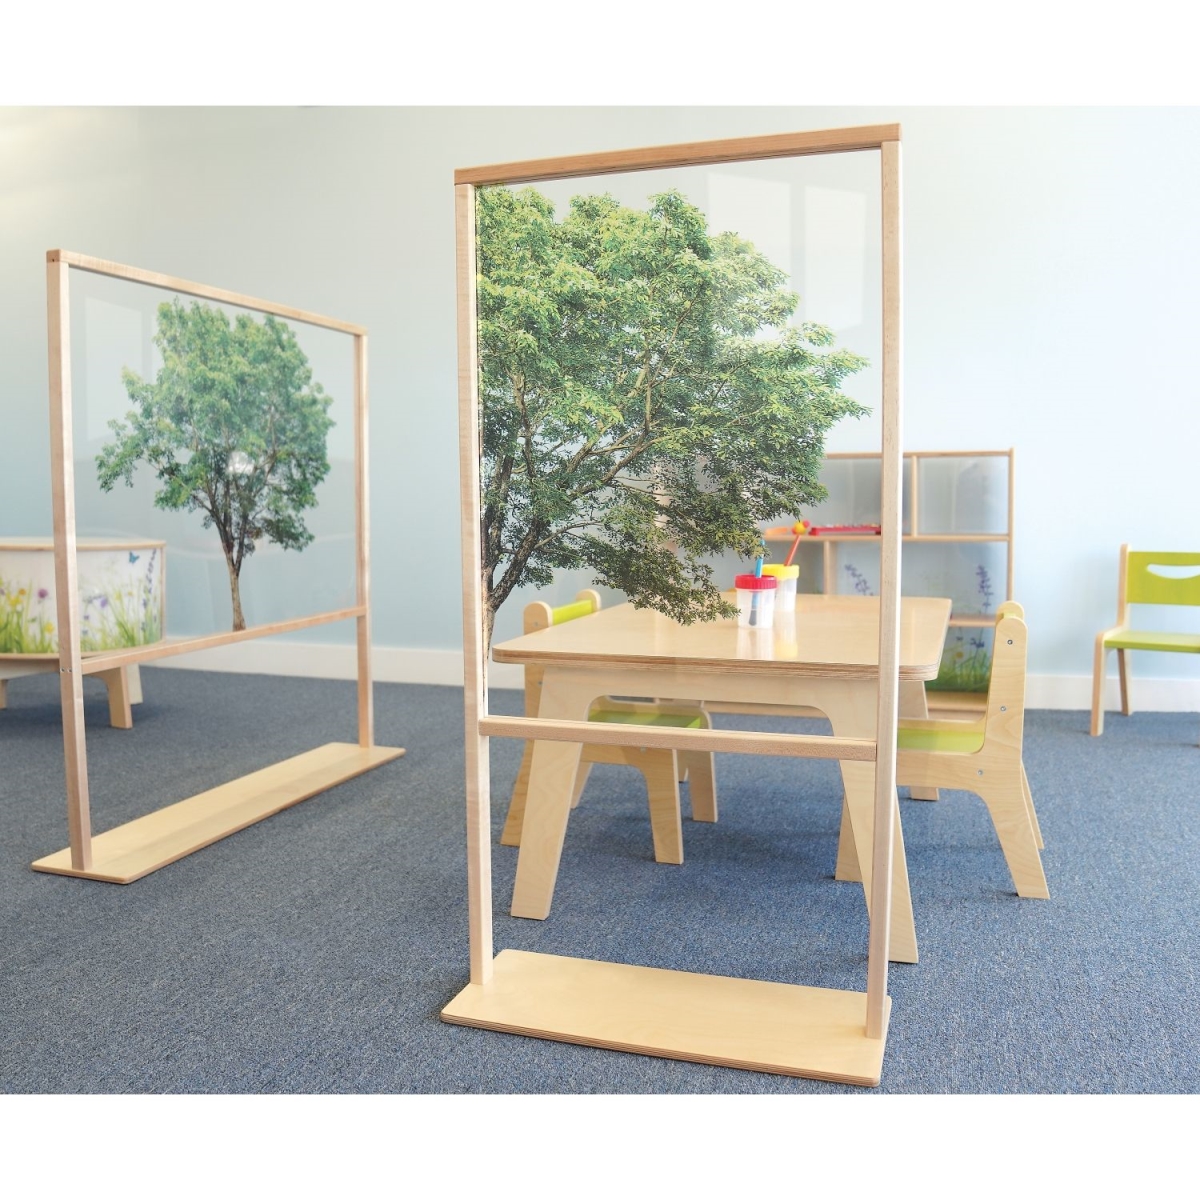 Wb0537 25w Nature View Floor Standing Partition - Natural Uv